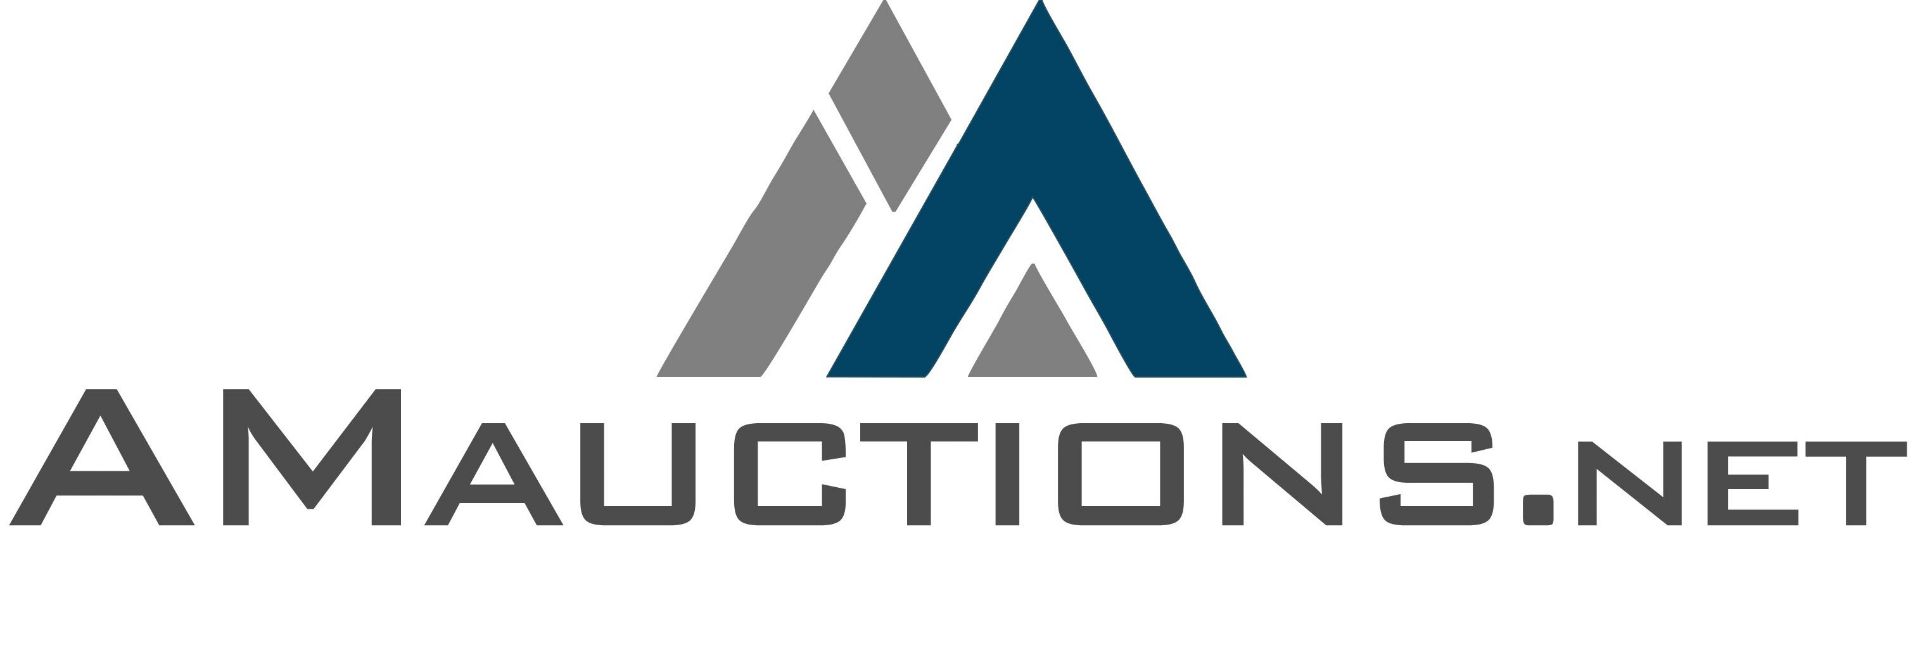 SALE IN CONJUNCTION WITH AM AUCTIONS.NET